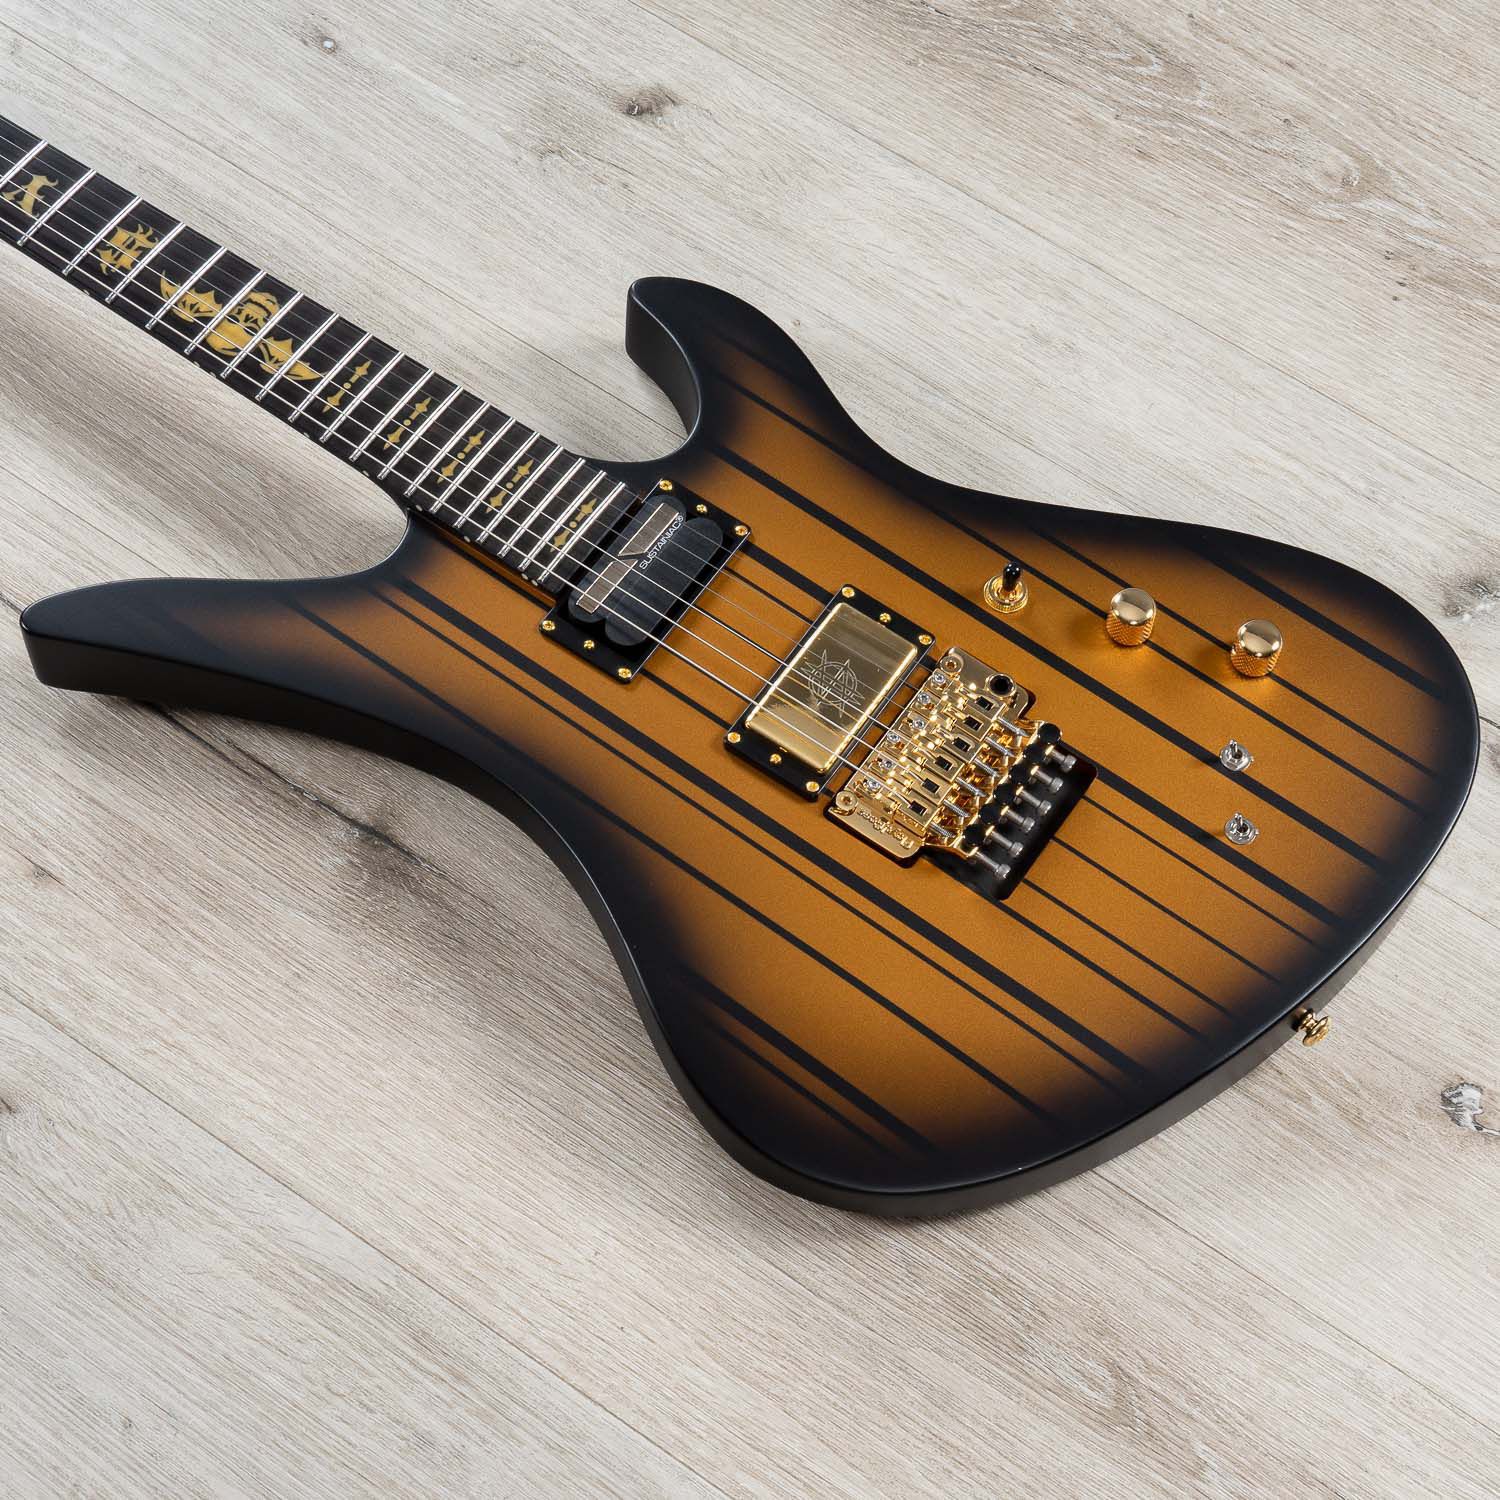 Synyster Gates Schecter Satin Gold Burst Custom S With Sustainiac